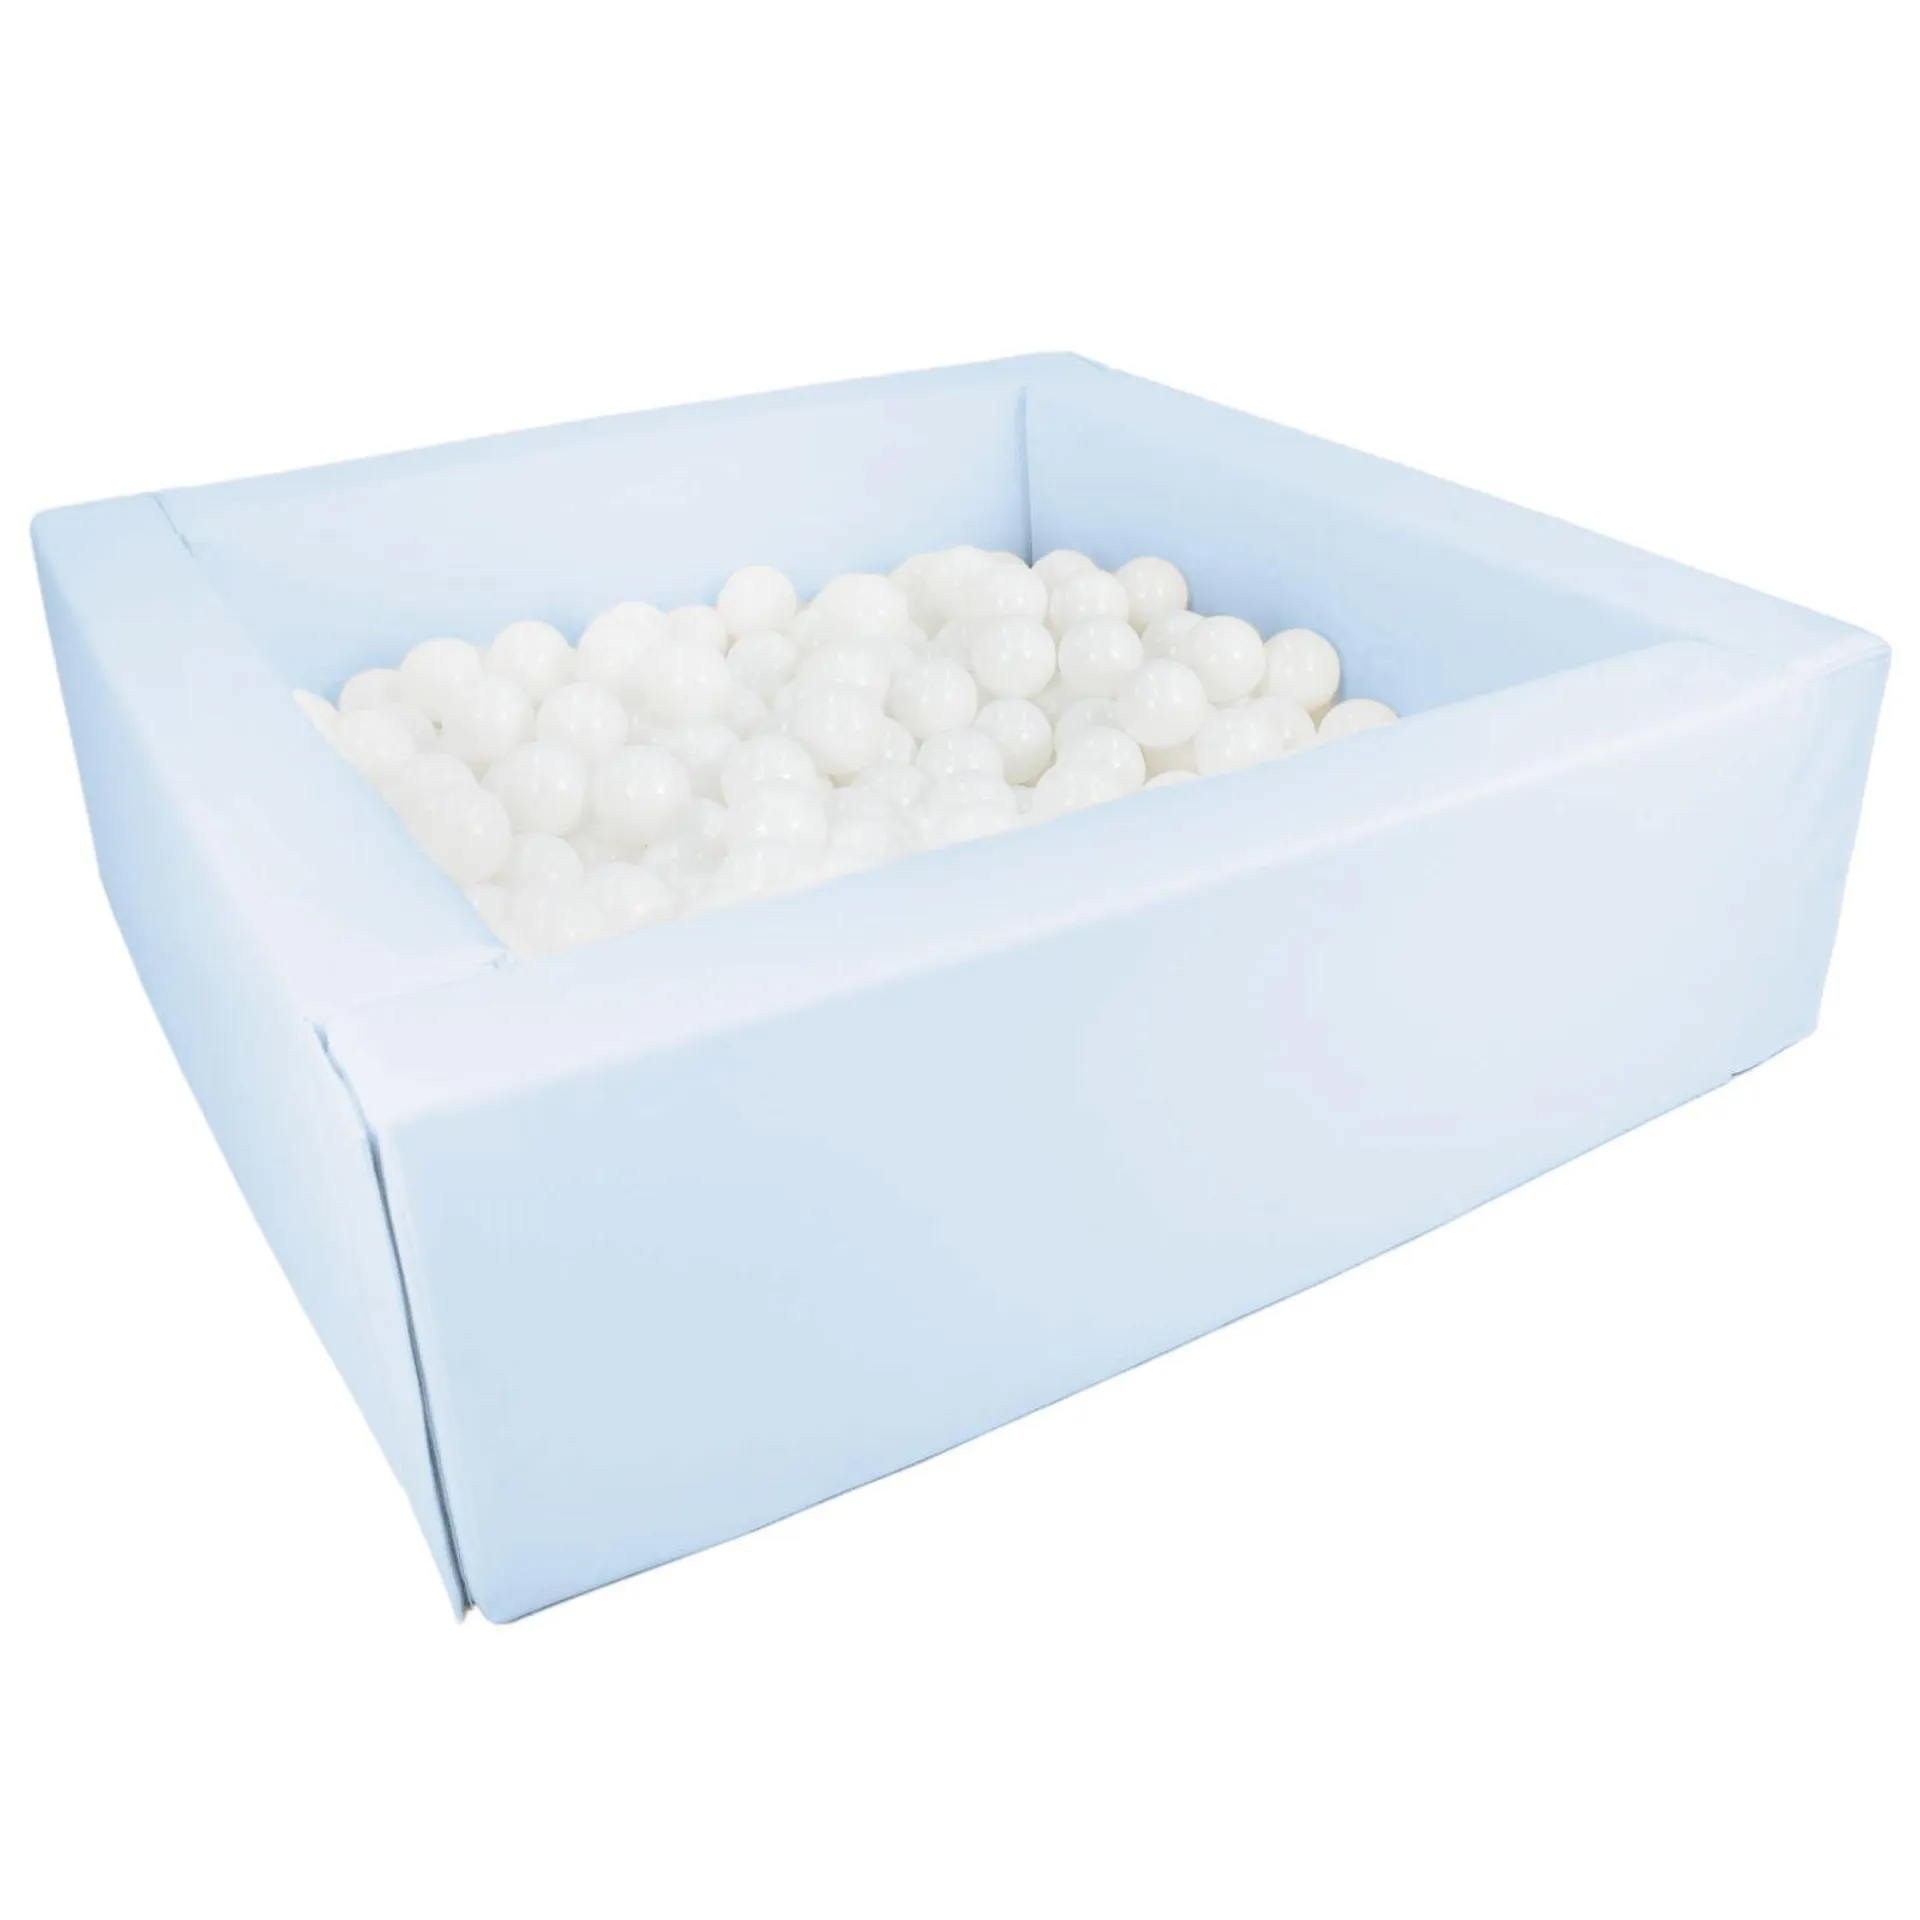 Eco Leather Beige Soft Play Ball Pit - 200 white balls